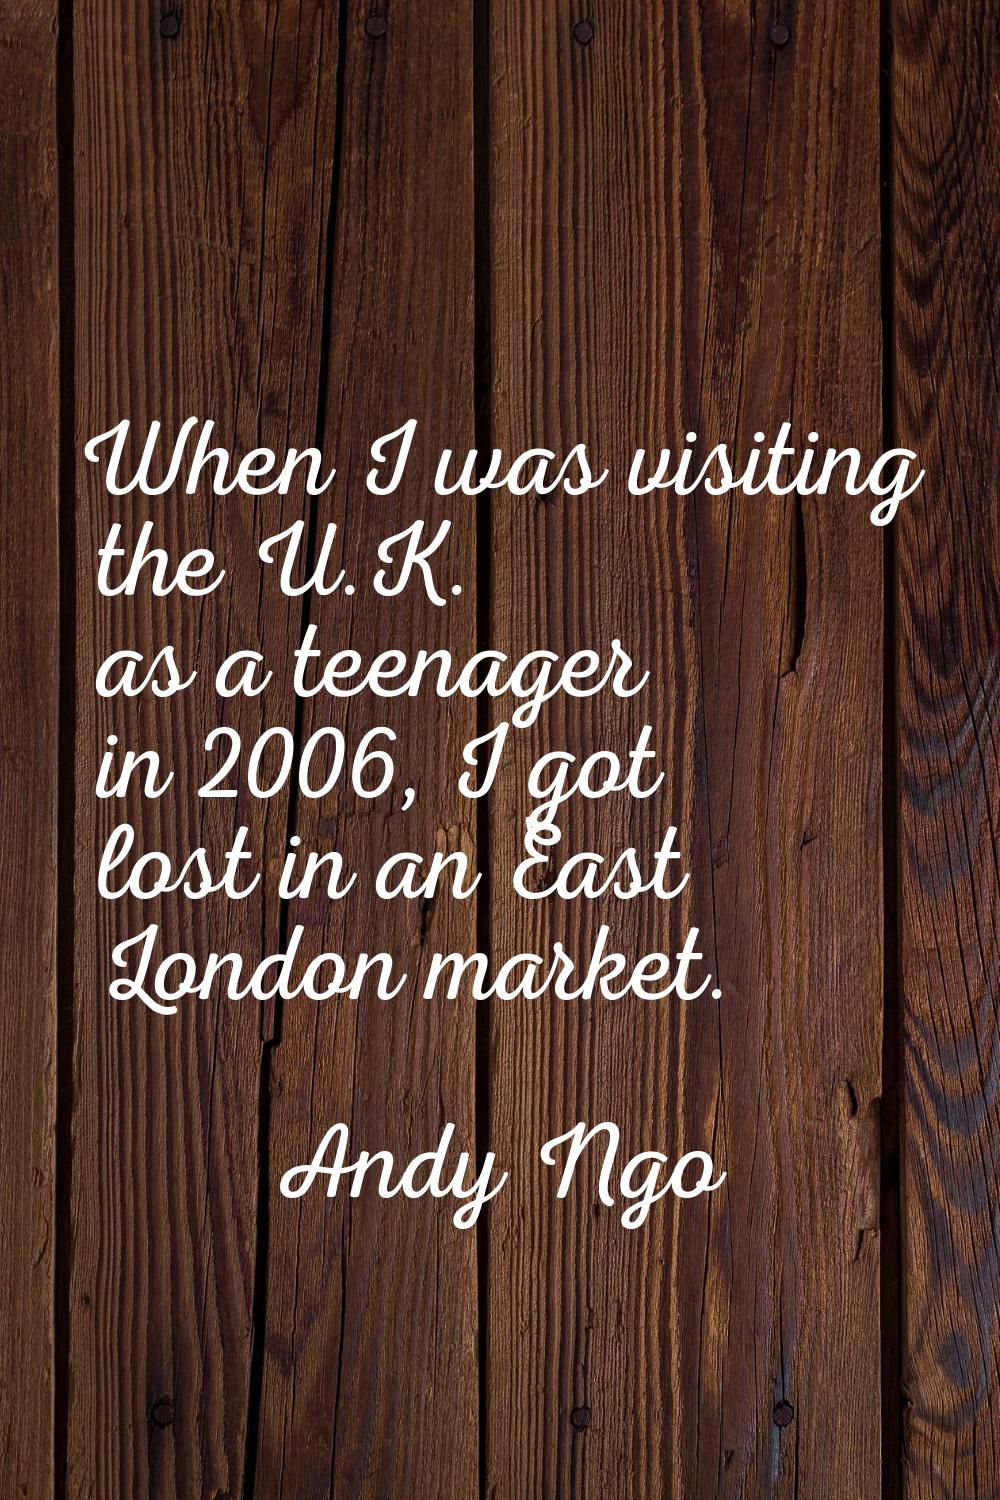 When I was visiting the U.K. as a teenager in 2006, I got lost in an East London market.